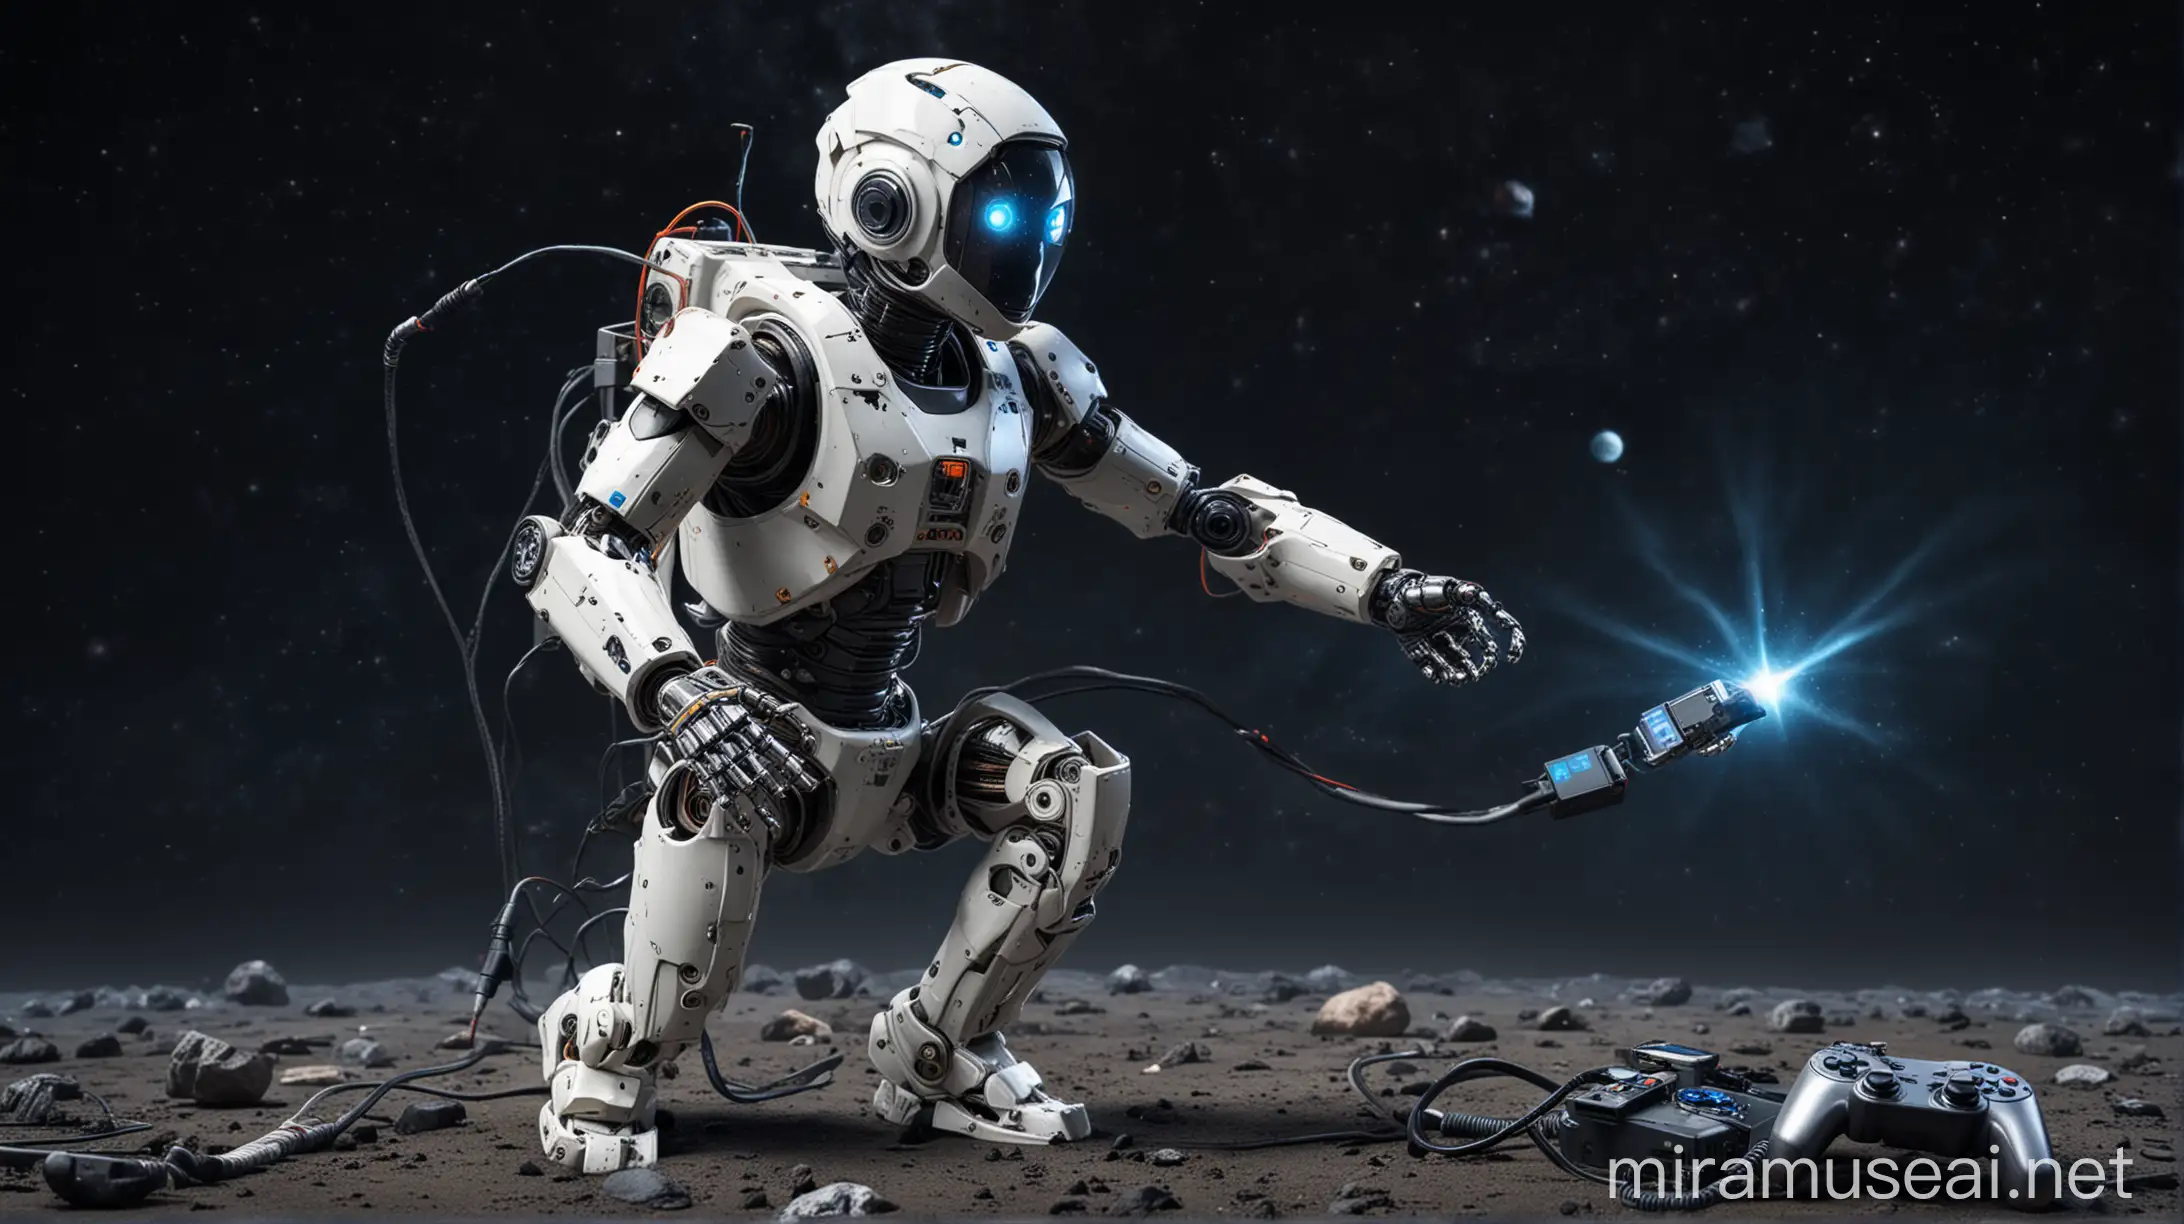 Robot Escaping Earth with Connected Game Console in Space